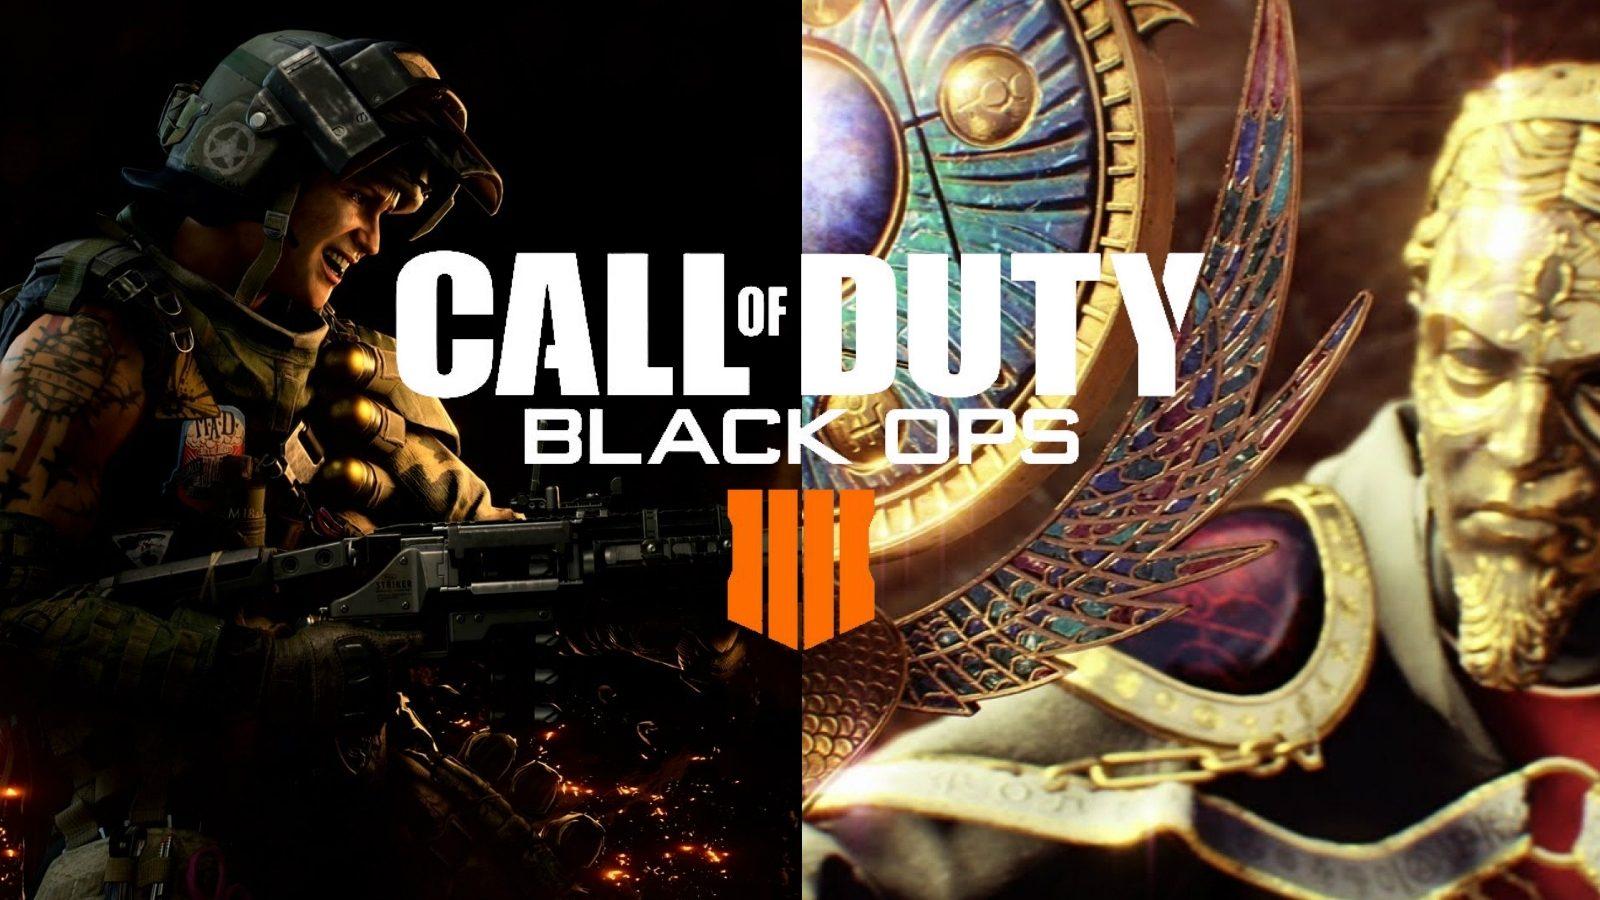 New Leaks Suggest Call of Duty: Black Ops 4 Will Feature Free DLC